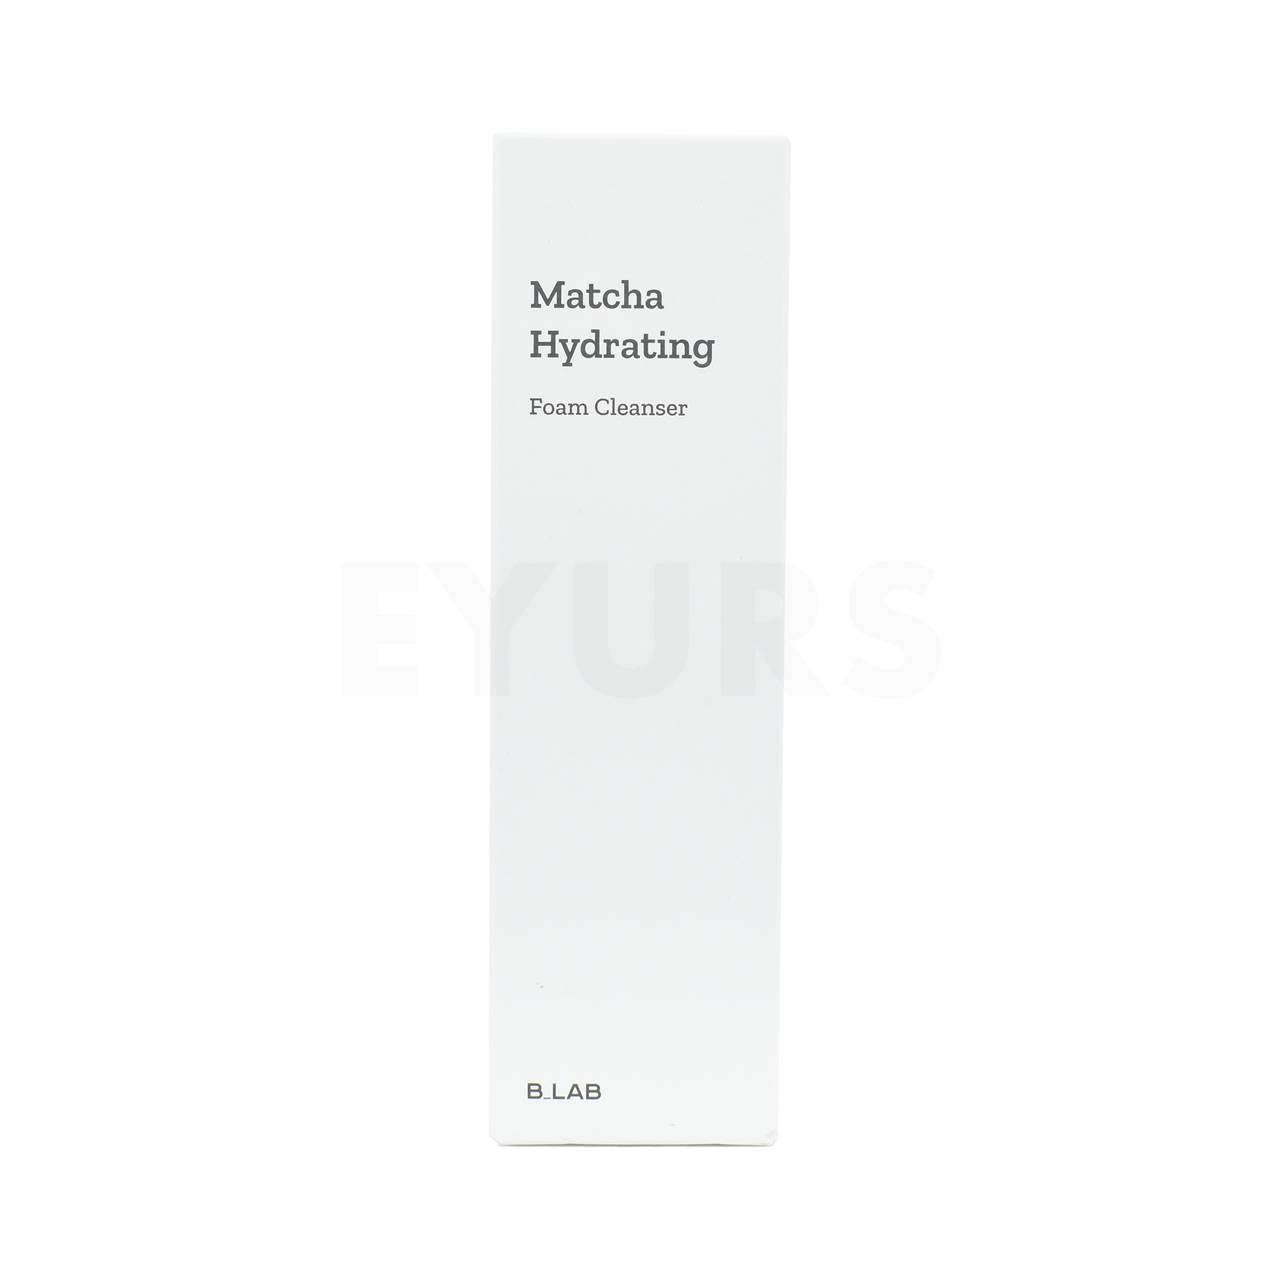 b_lab matcha hydrating foam cleanser front side packaging